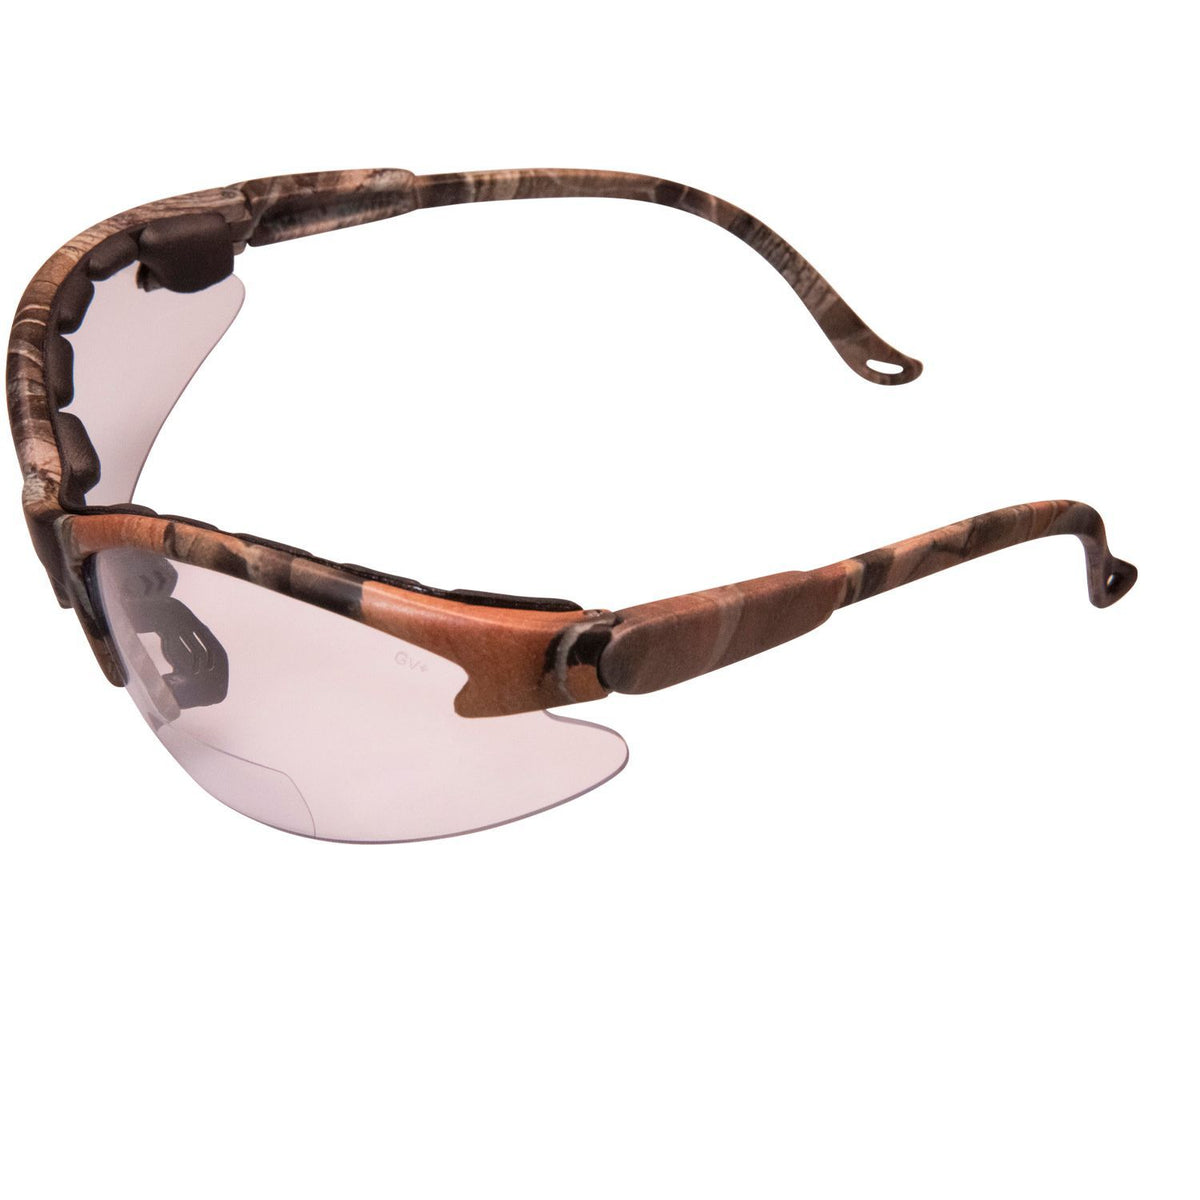 Cougar Foam Padded Bifocal Safety Glasses with 12 Limited Edition Frame Color and Magnifier Options